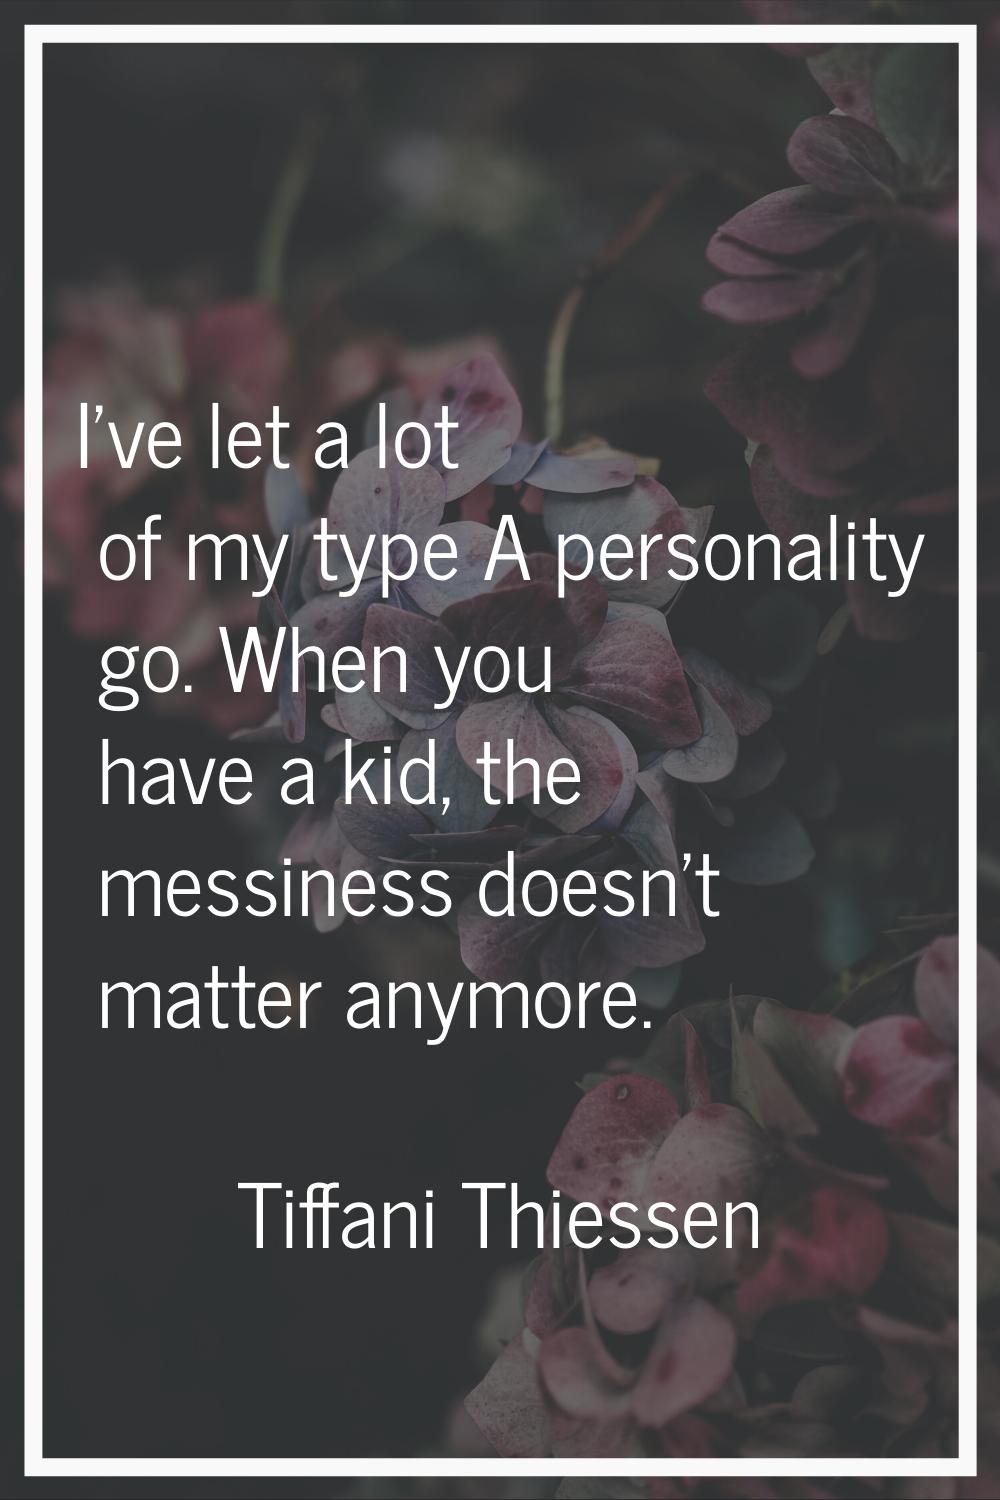 I've let a lot of my type A personality go. When you have a kid, the messiness doesn't matter anymo